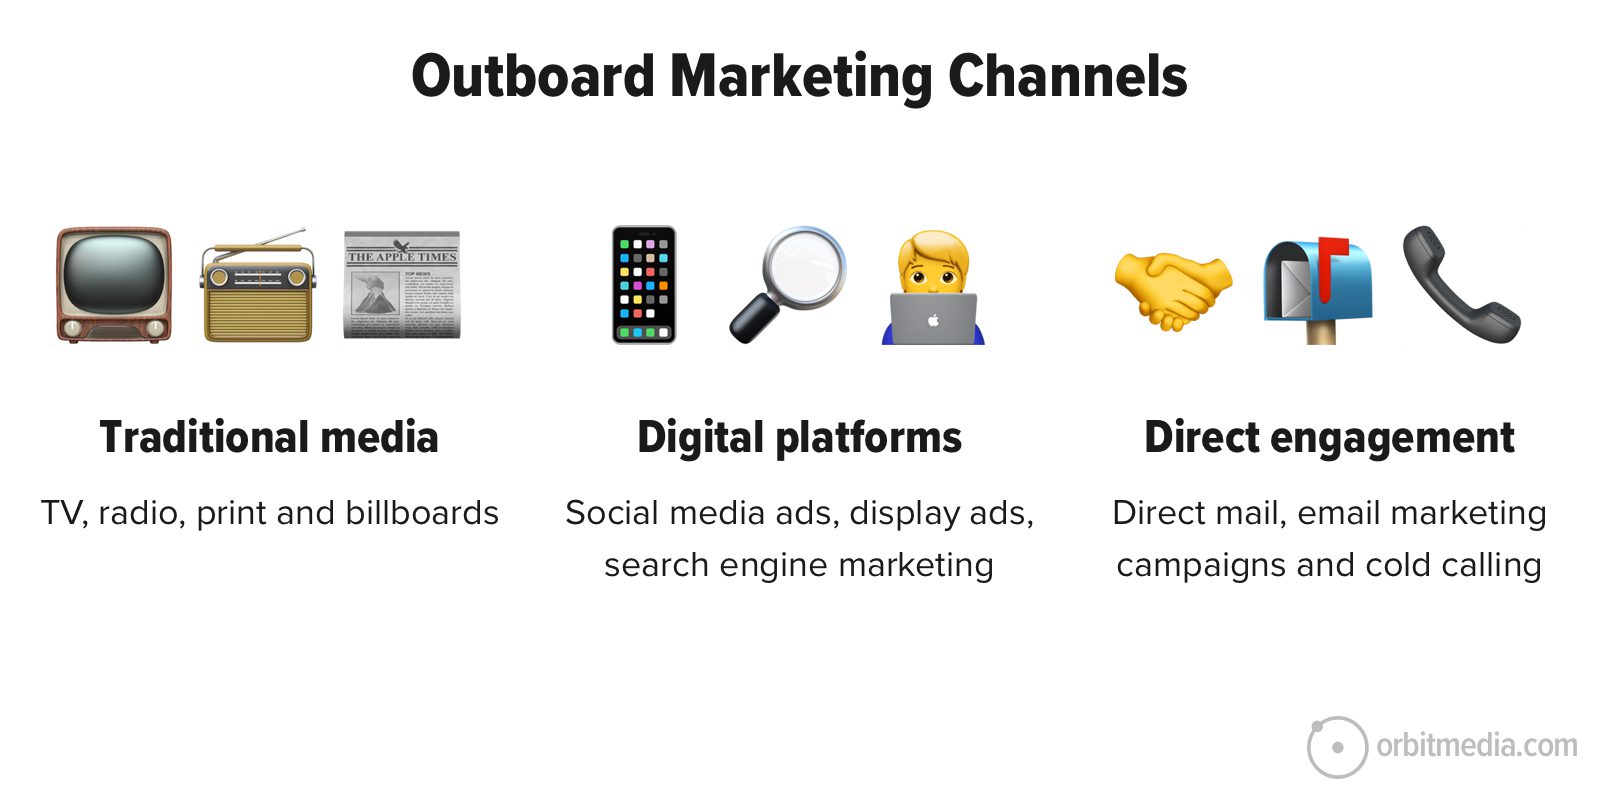 Graphic showing "outboard marketing channels" categorized into traditional media, digital platforms, and direct engagement with corresponding icons for each category.